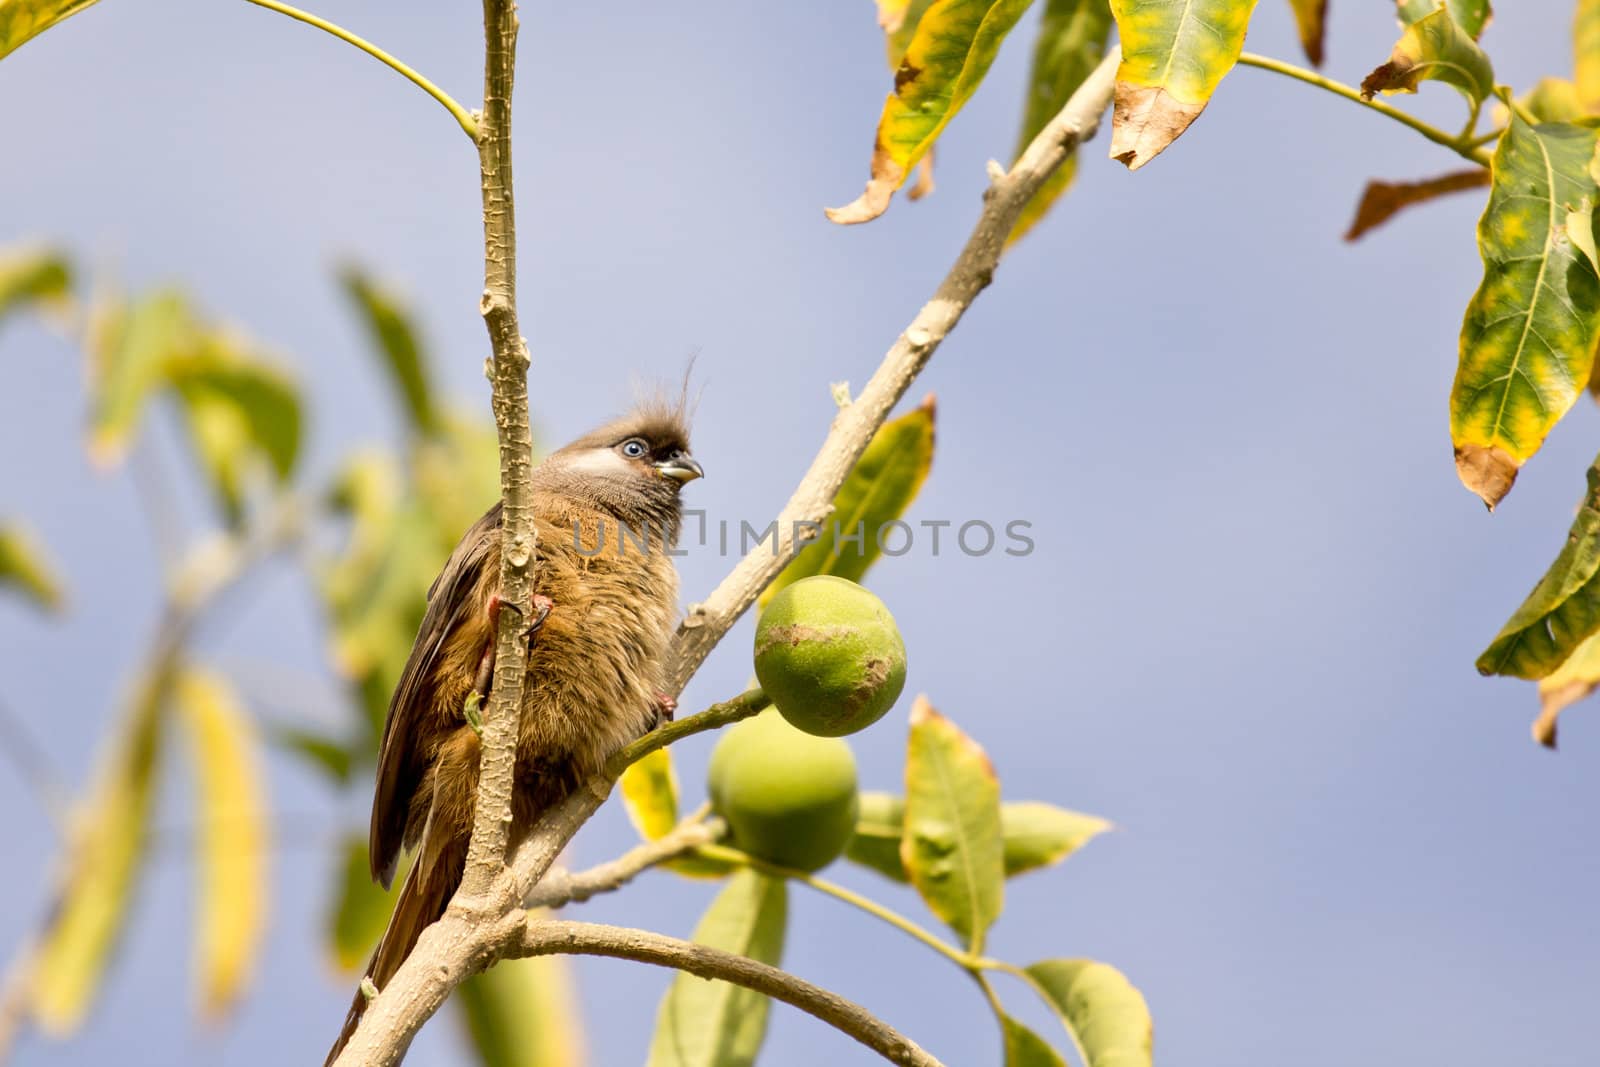 Speckled Mousebird by derejeb